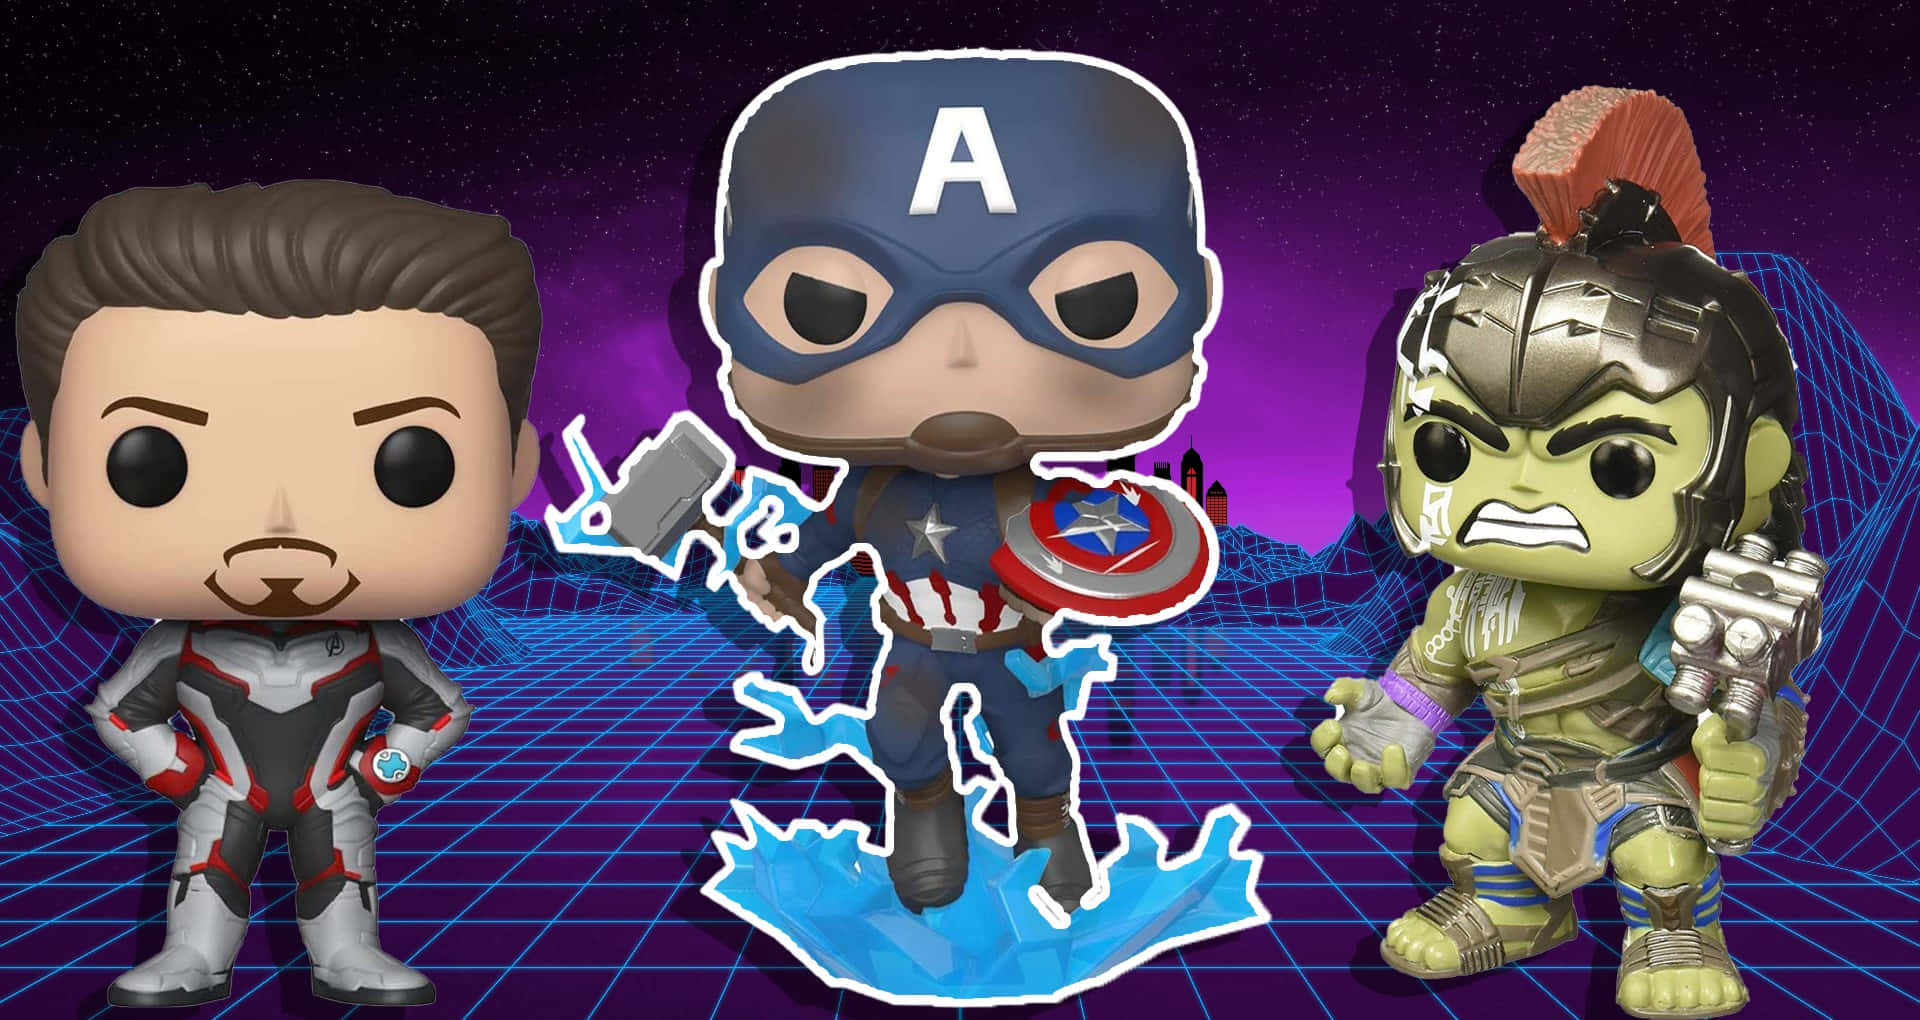 Get your Iron Man Pop Figures now to complete your collection! Wallpaper